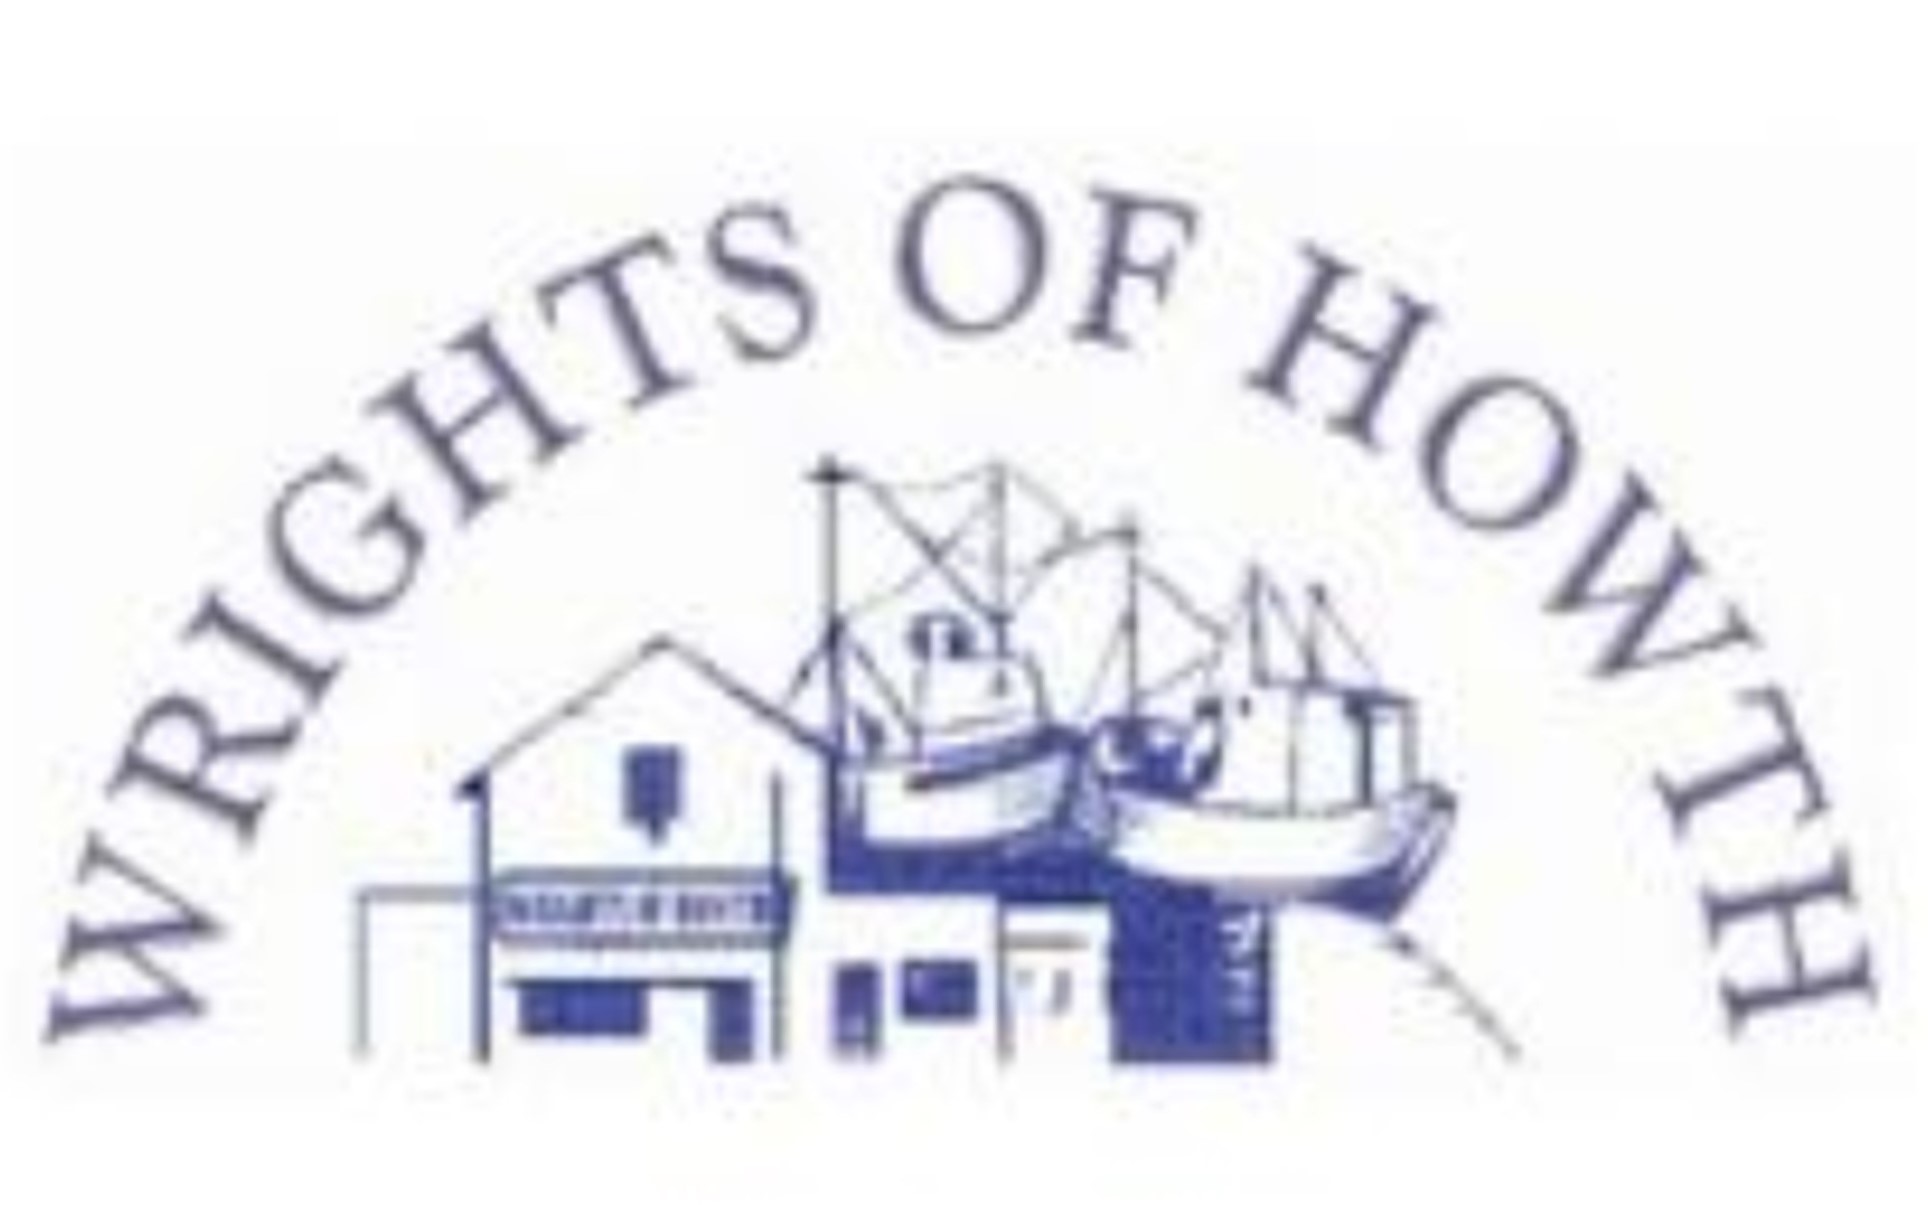 Wrights of Howth